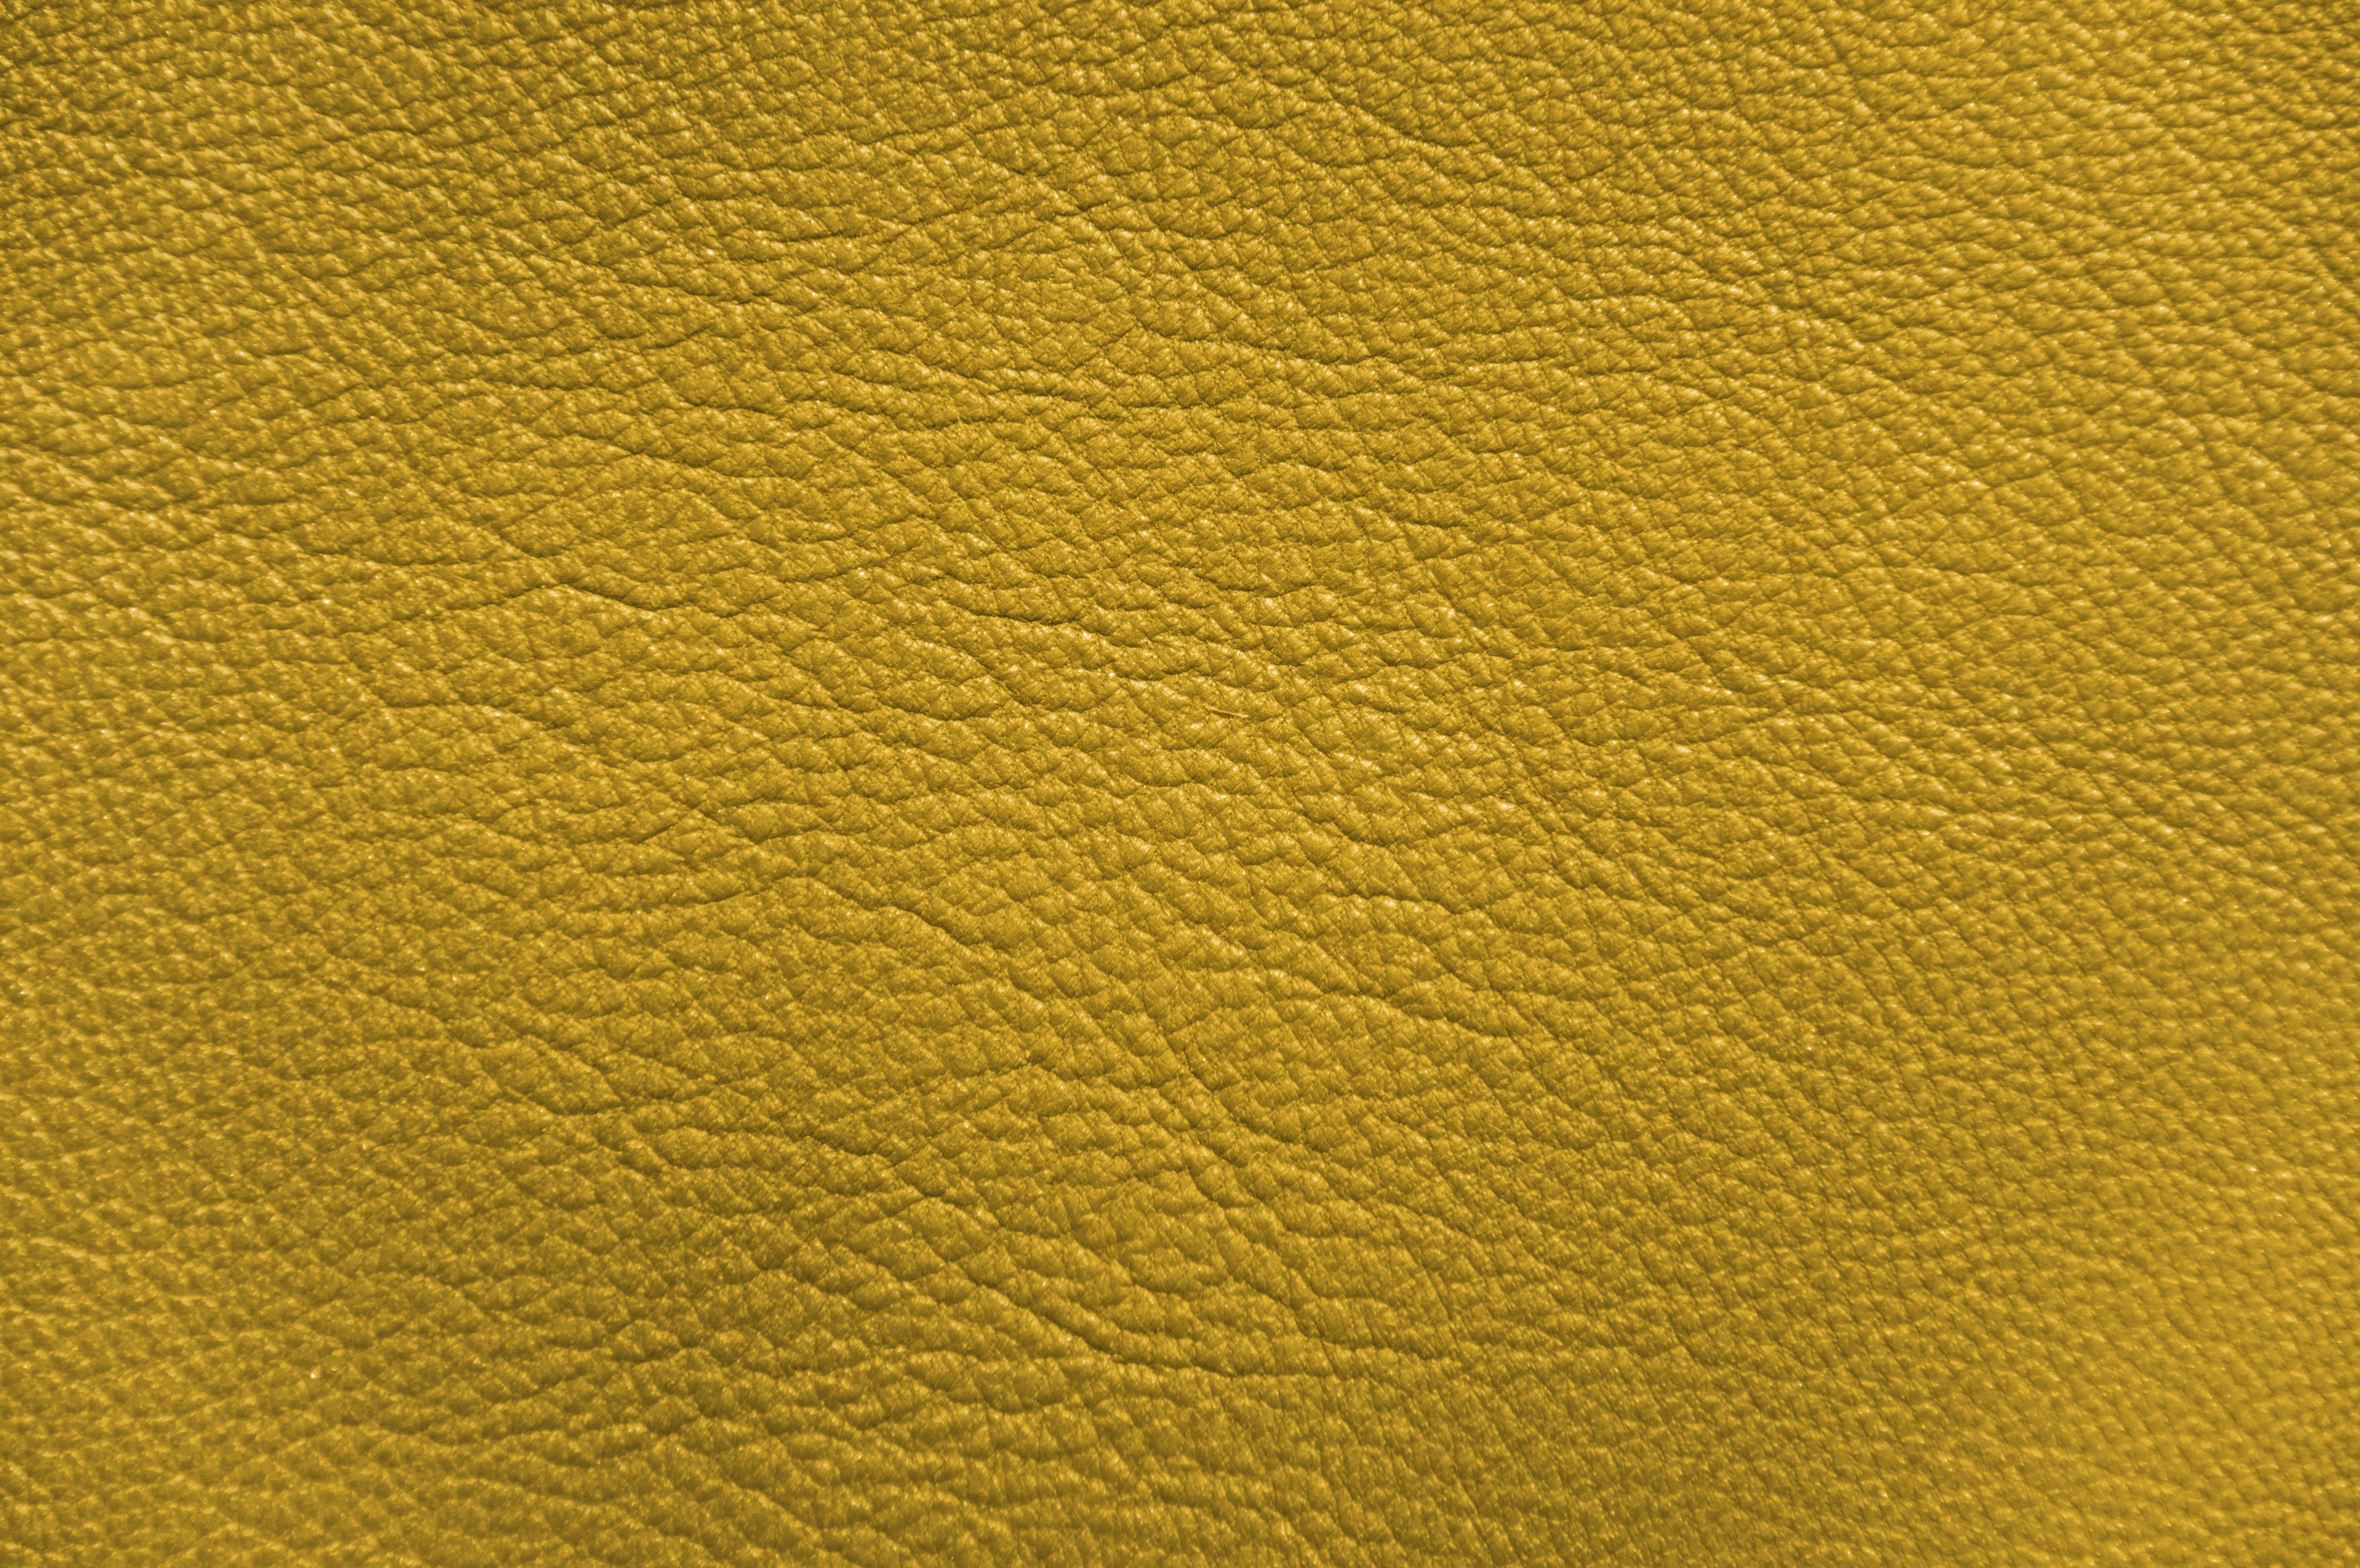 Yellow Leather 5k, HD Photography, 4k Wallpaper, Image